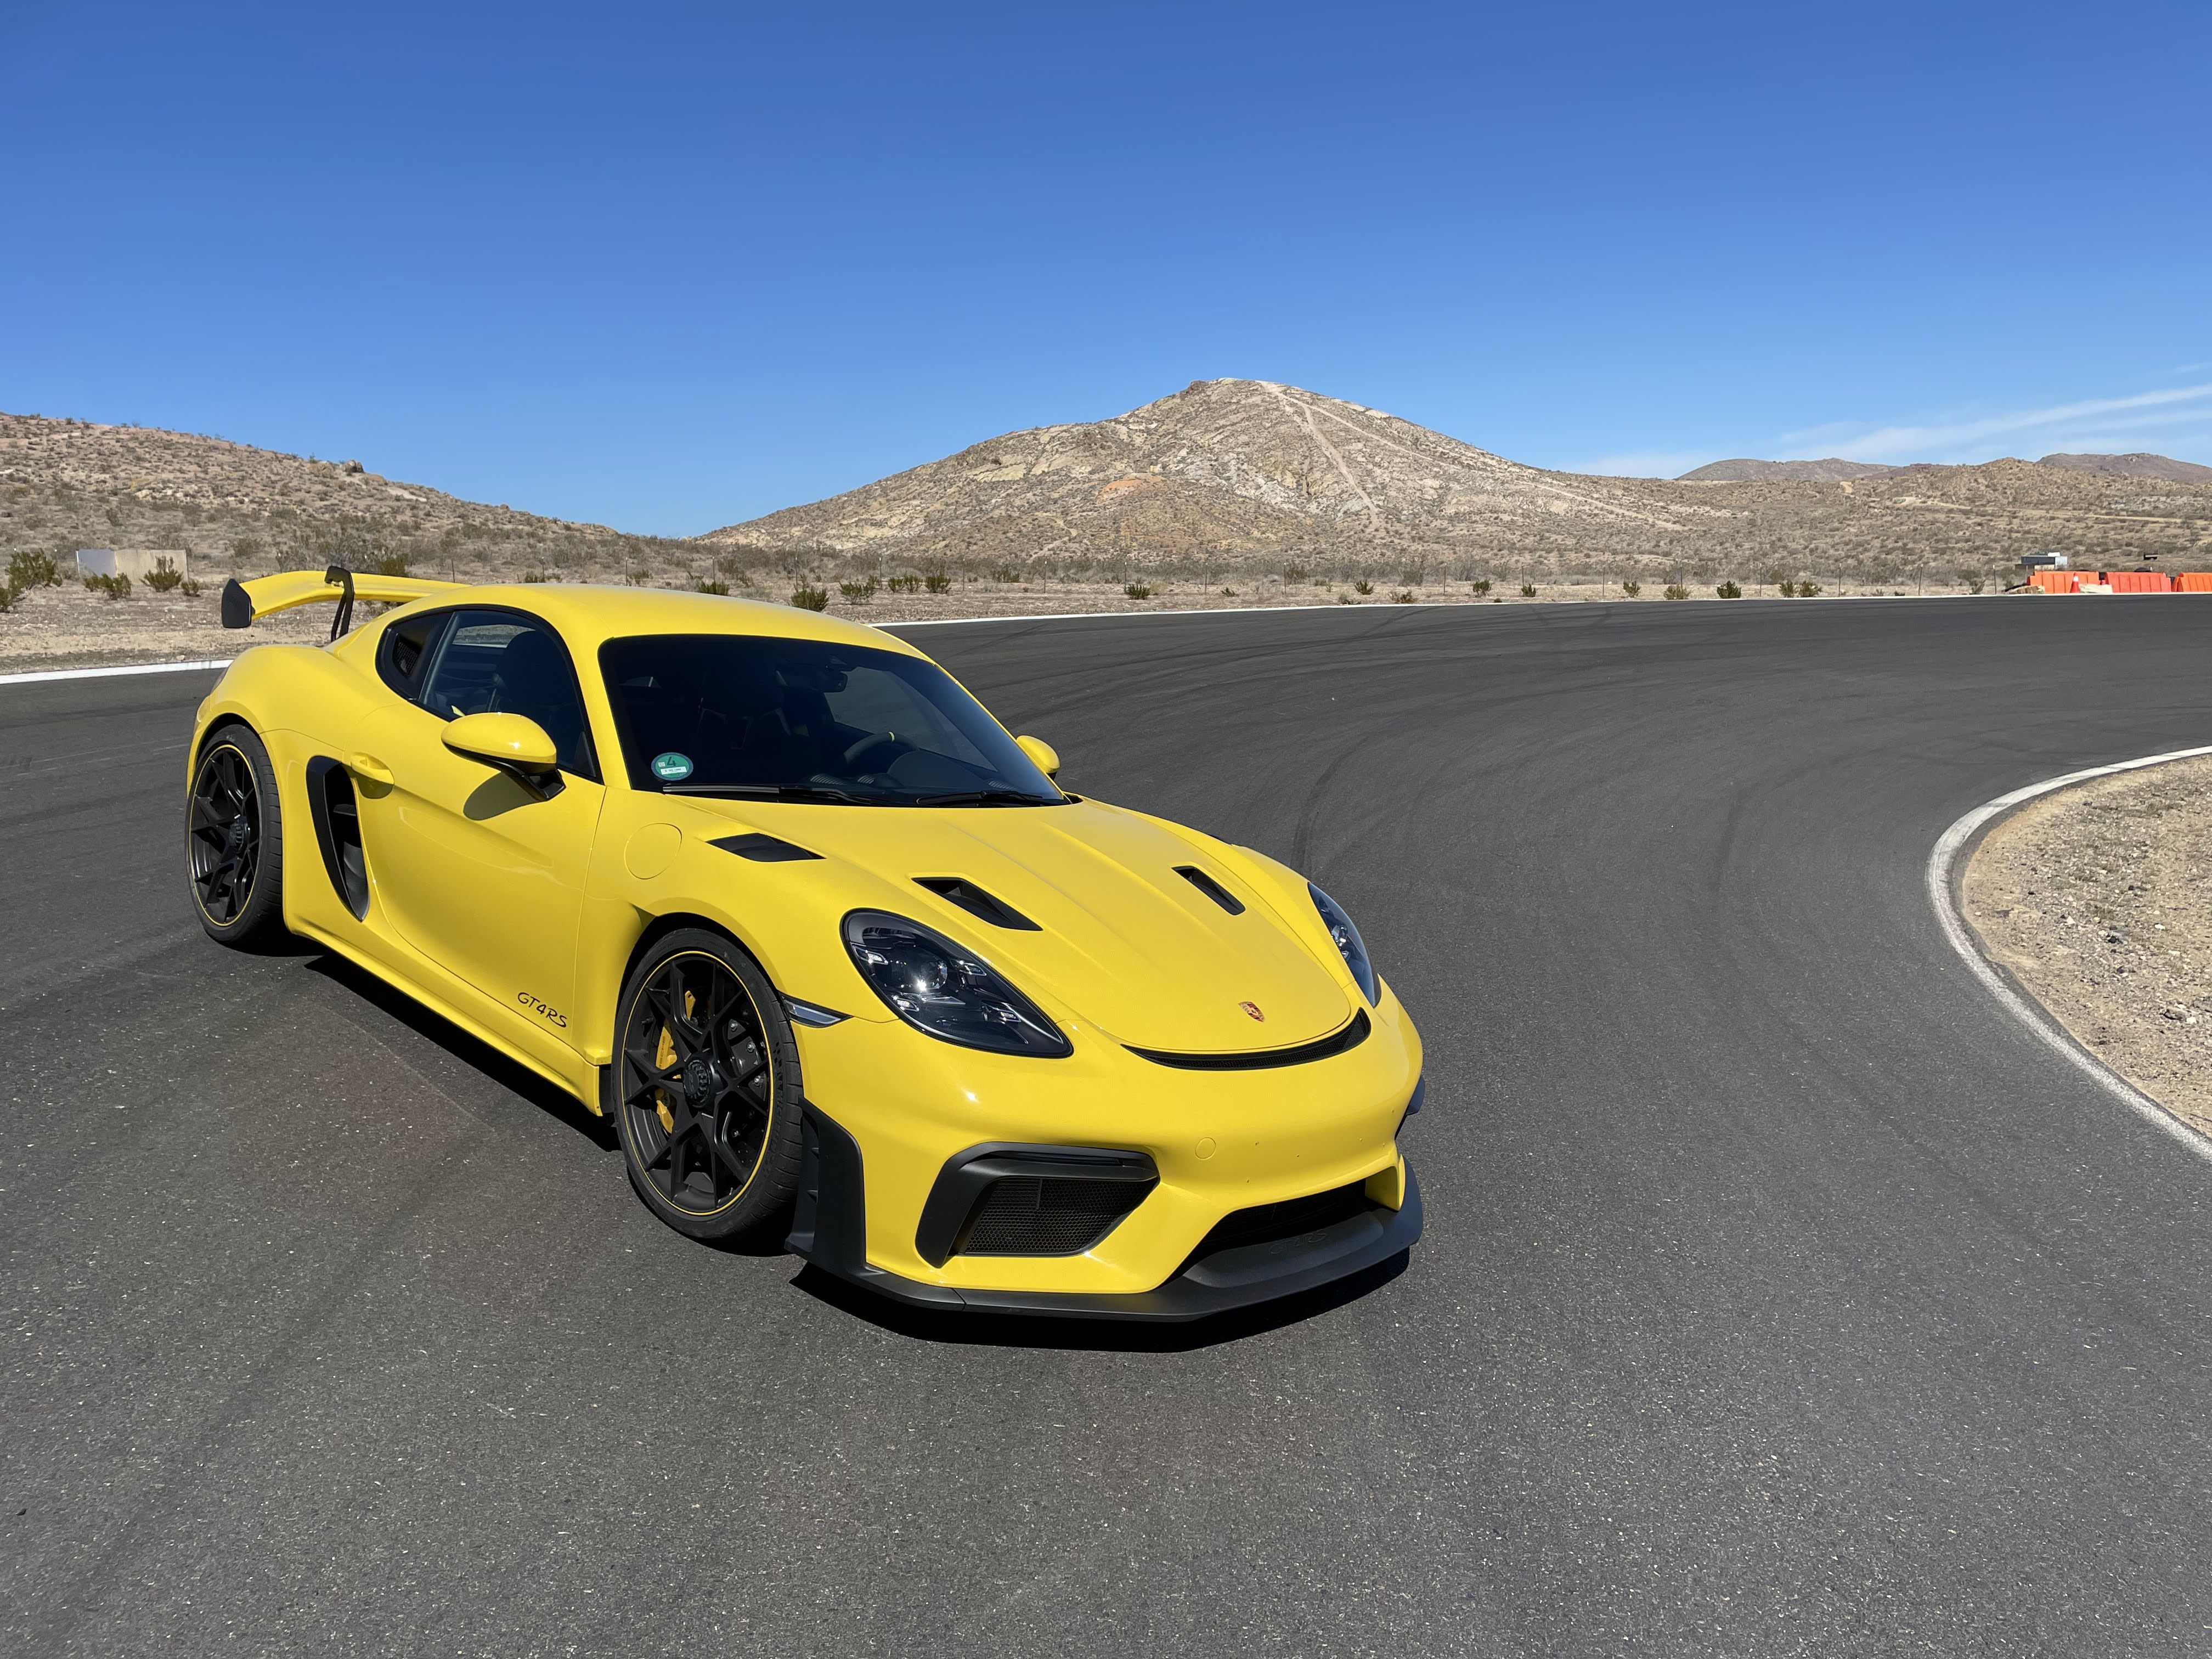 Review: The 2022 Porsche 718 Cayman GT4 RS isn't meant for most drivers,  but a madman with a mission - The Globe and Mail